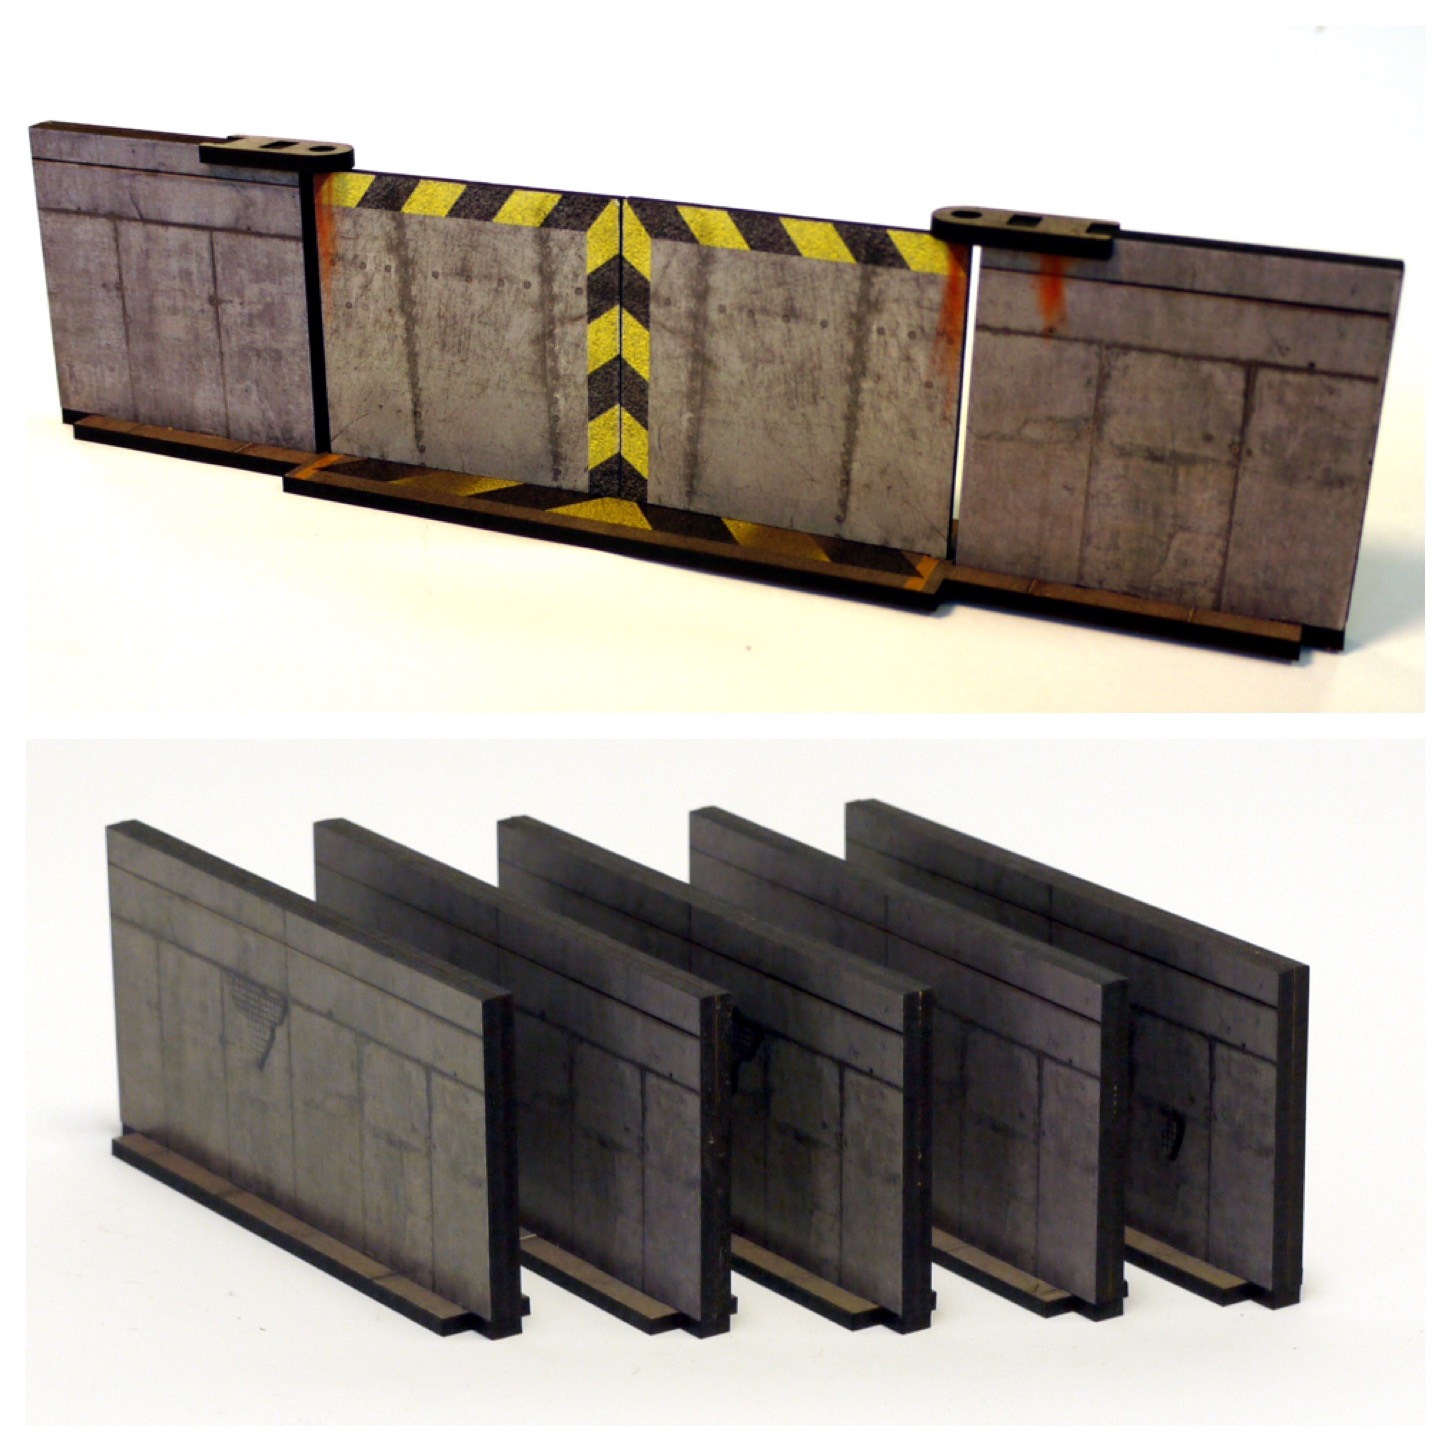 Pre-Printed Security Gate and Wall bundle offer!!!!